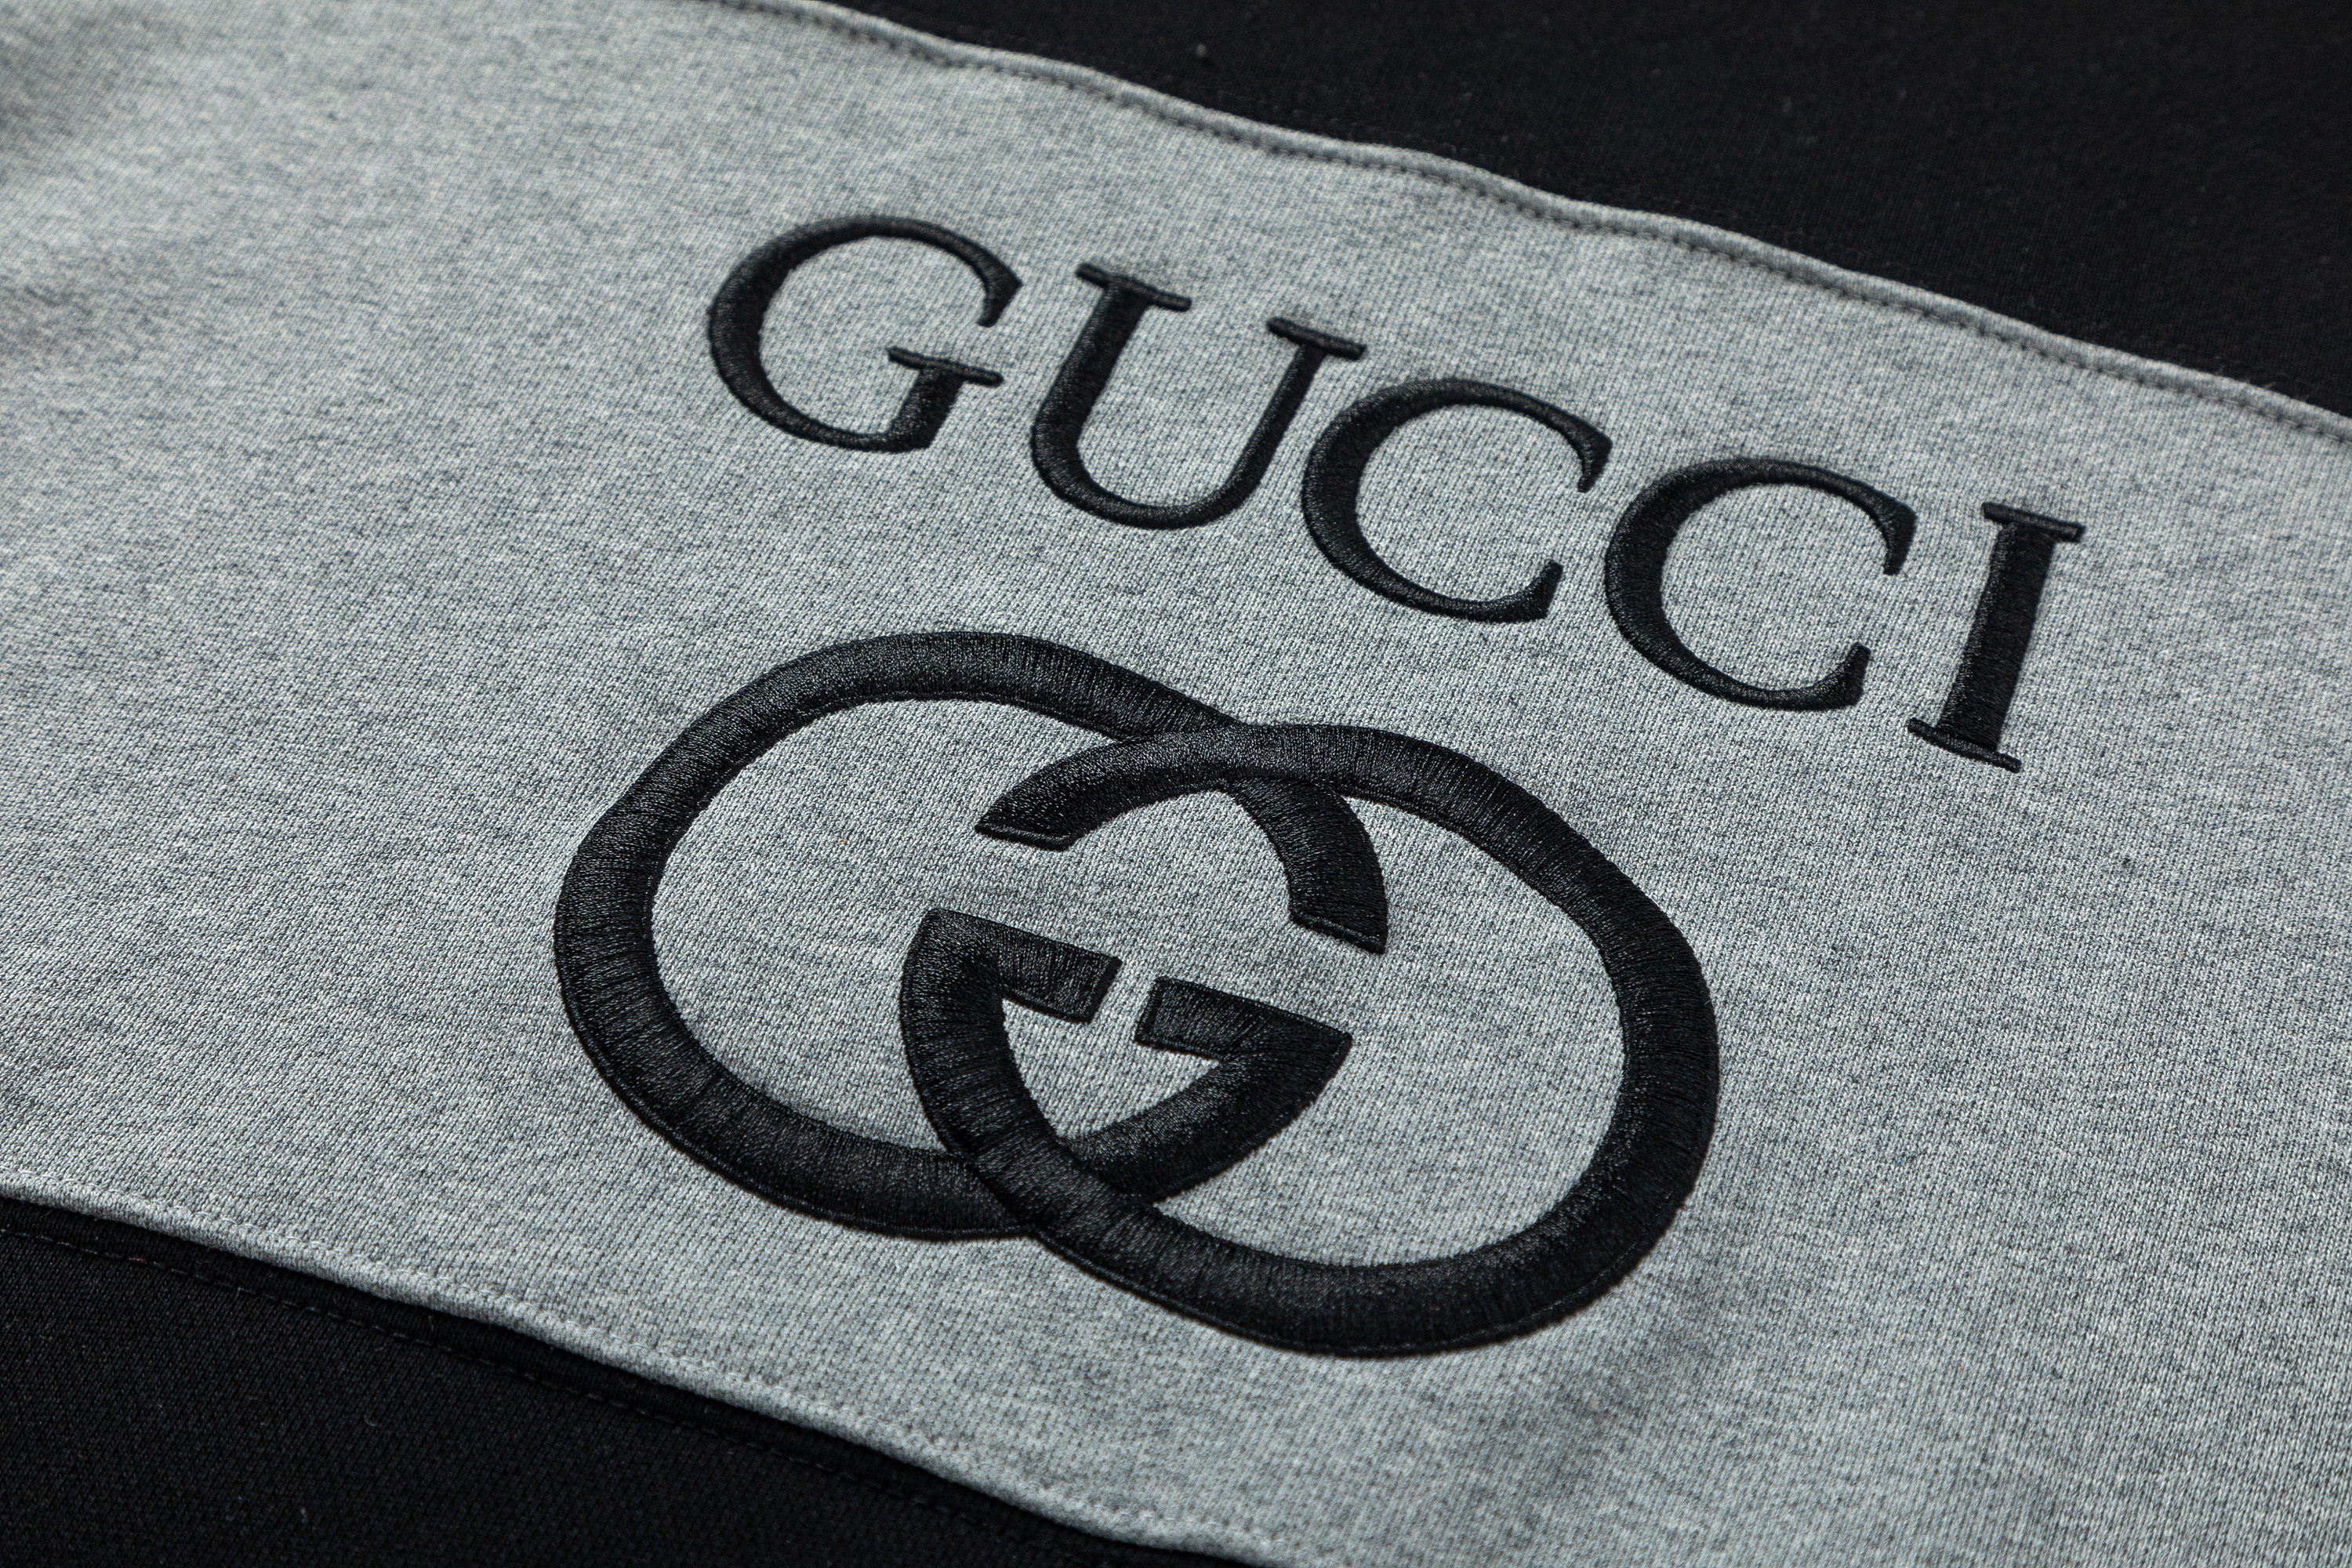 Gucci Sweatshirts For Men # 263595, cheap Gucci Hoodies, only $46!